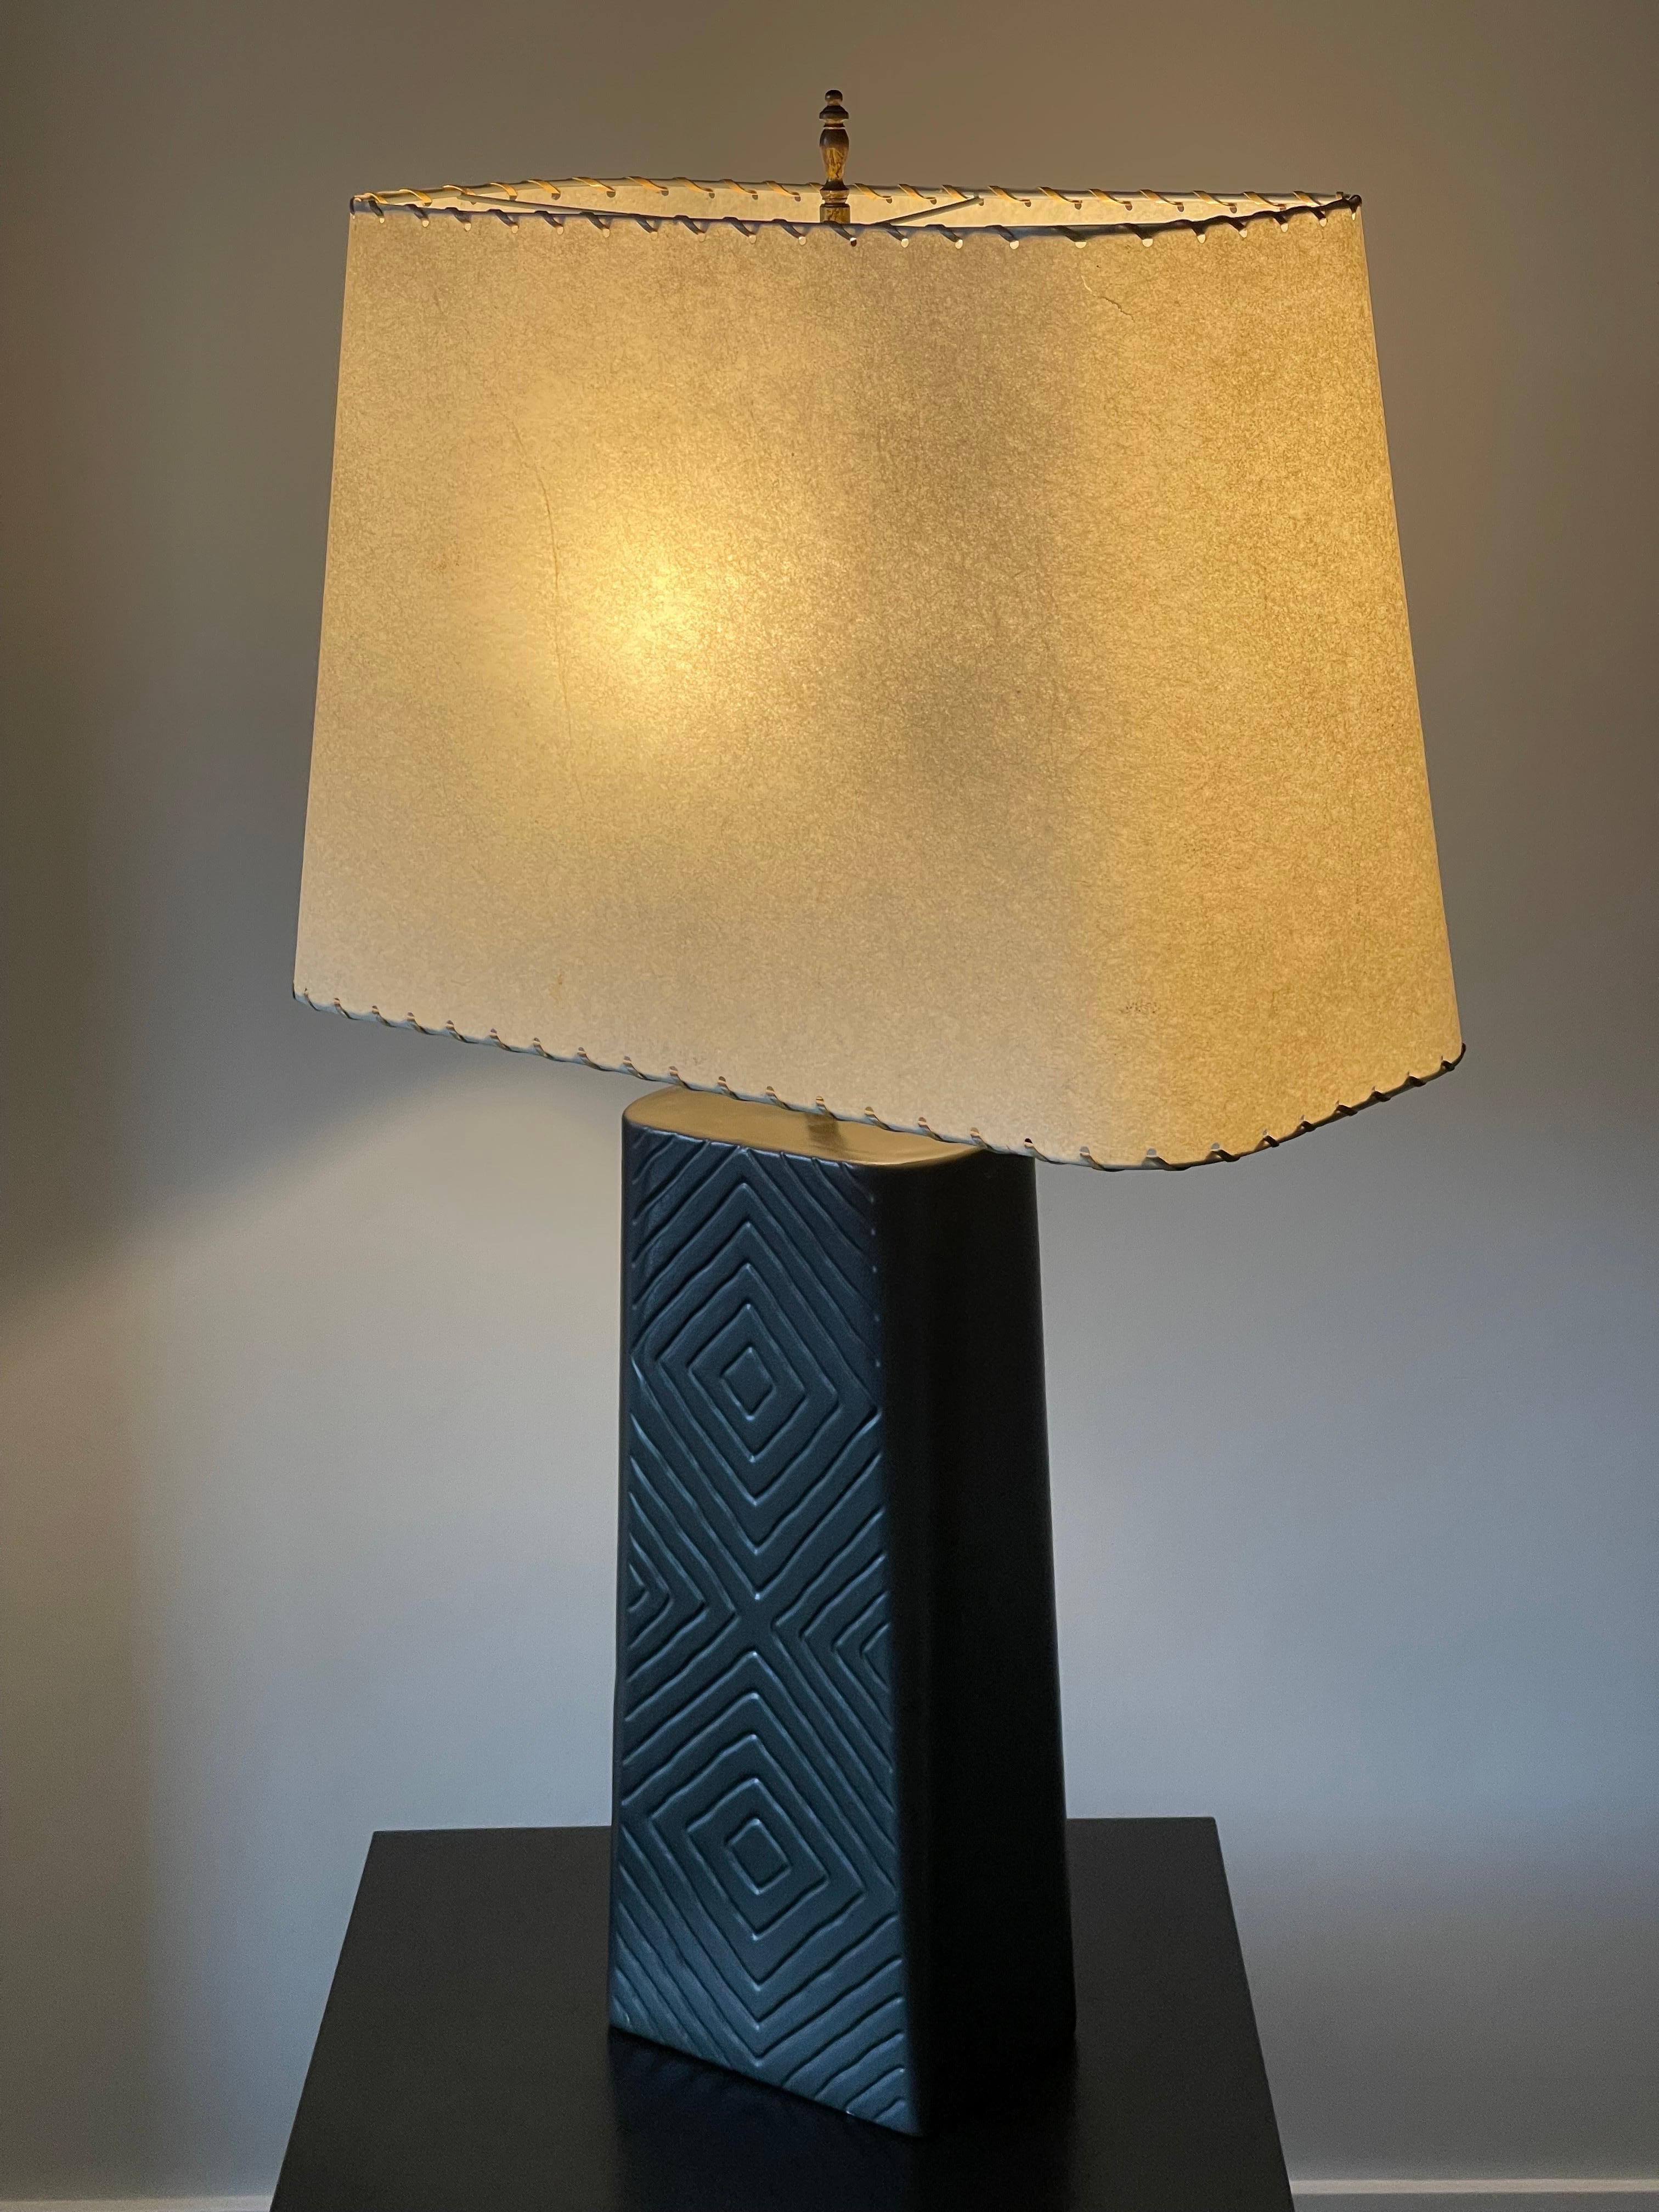 Large Mid-Century Modern Ceramic Table Lamp with Original Shade  For Sale 3